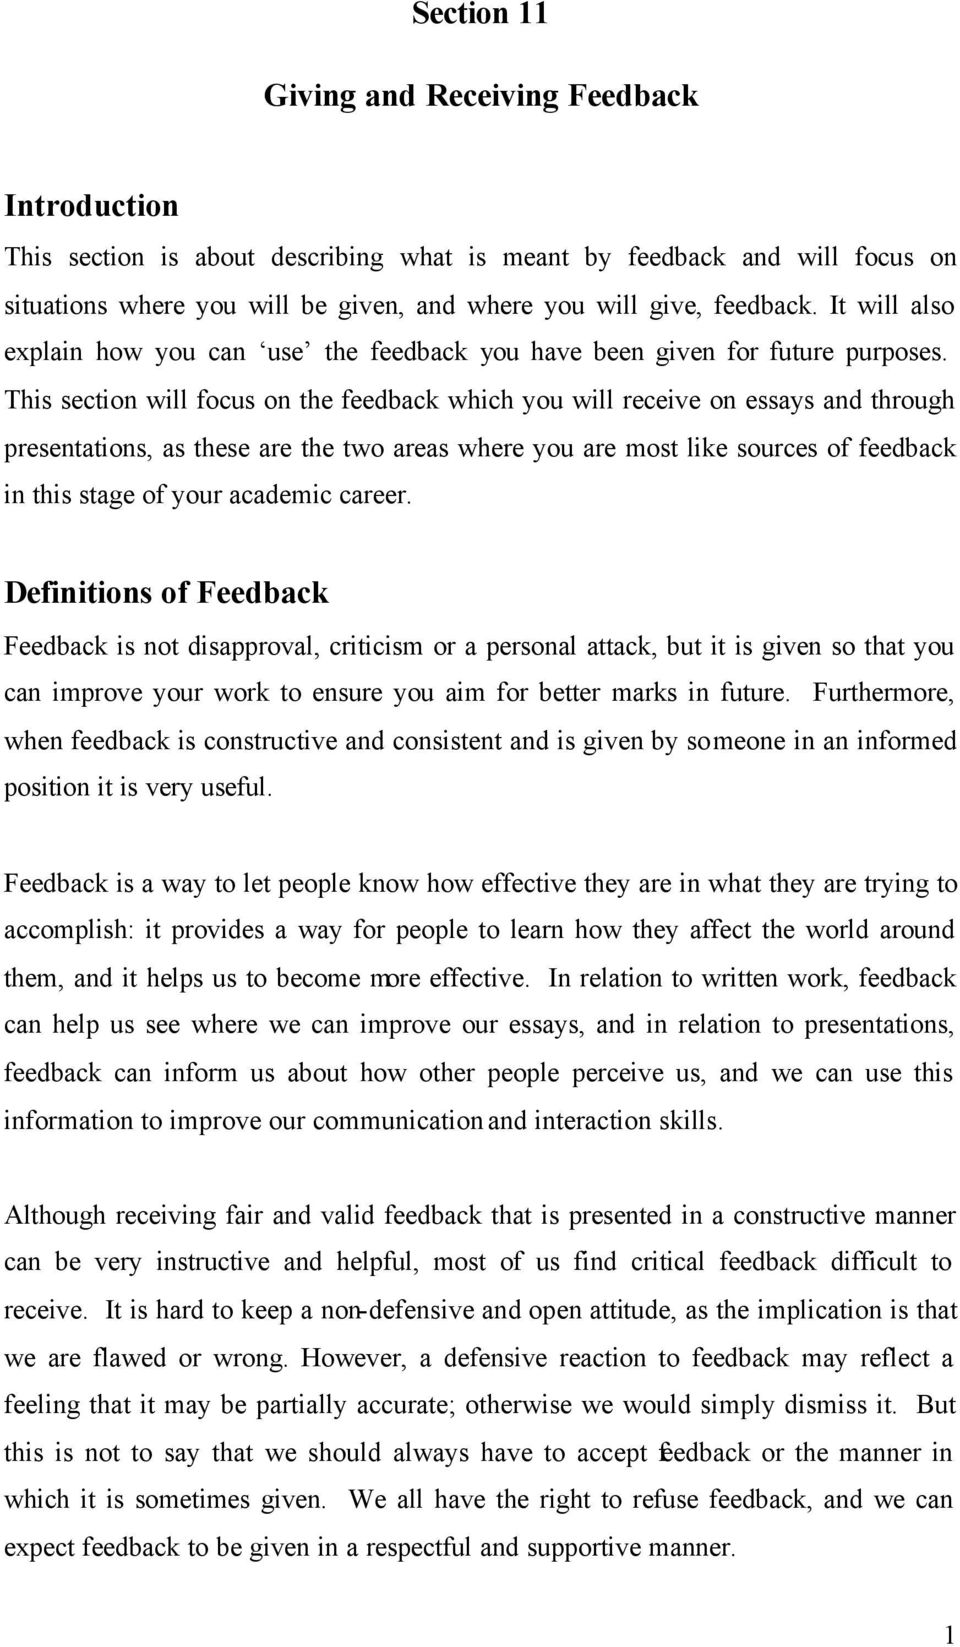 This section will focus on the feedback which you will receive on essays and through presentations, as these are the two areas where you are most like sources of feedback in this stage of your